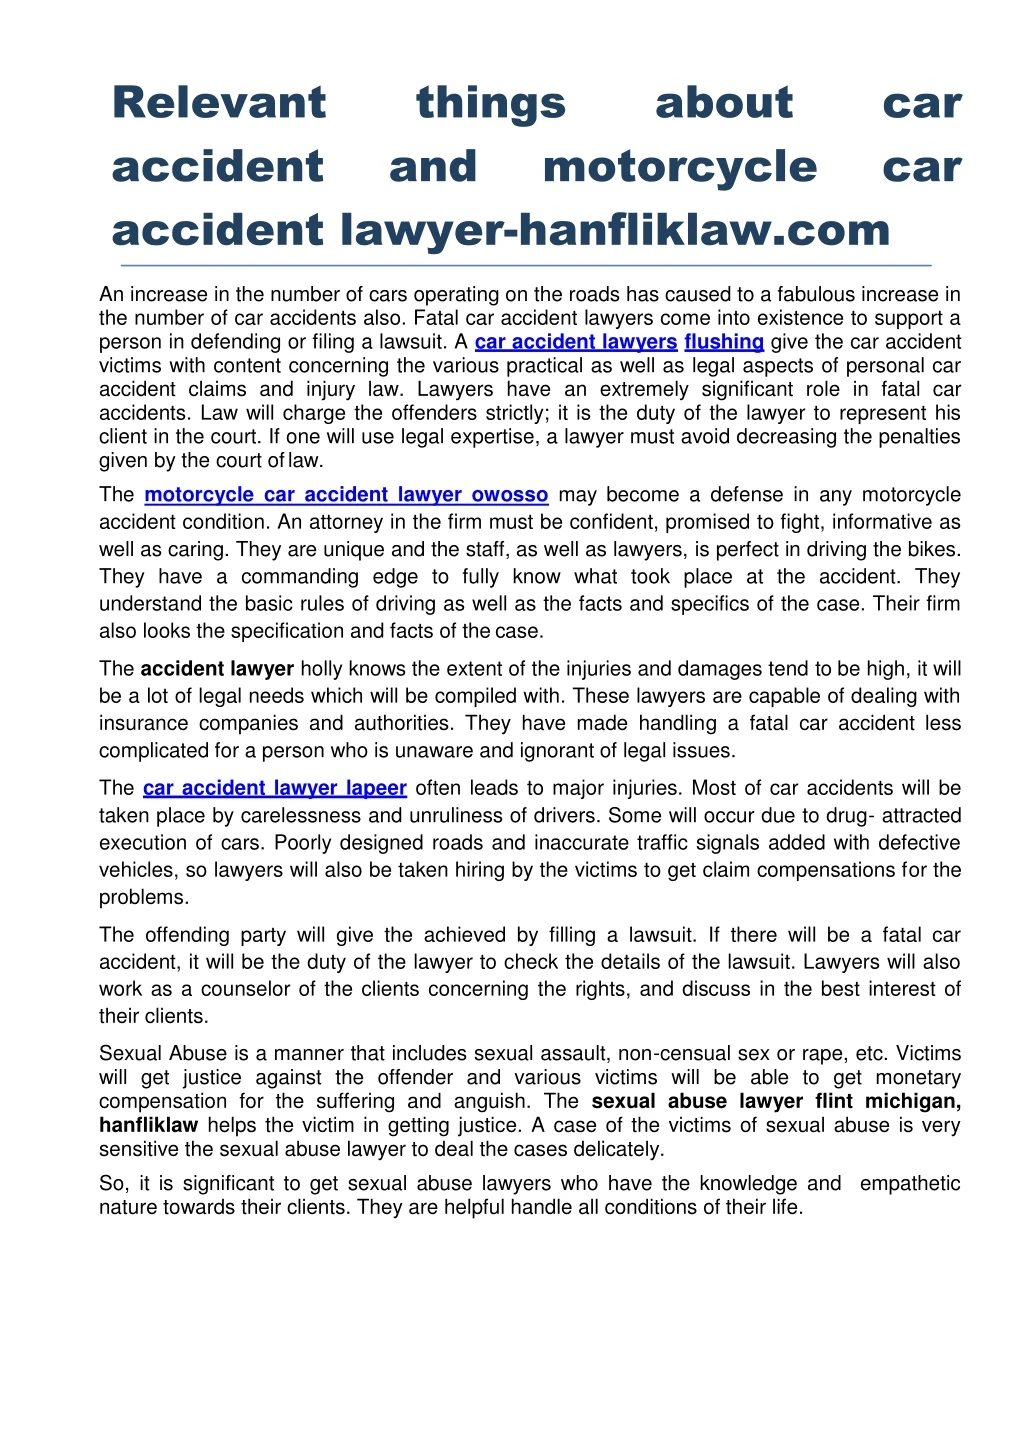 relevant accident accident lawyer hanfliklaw com